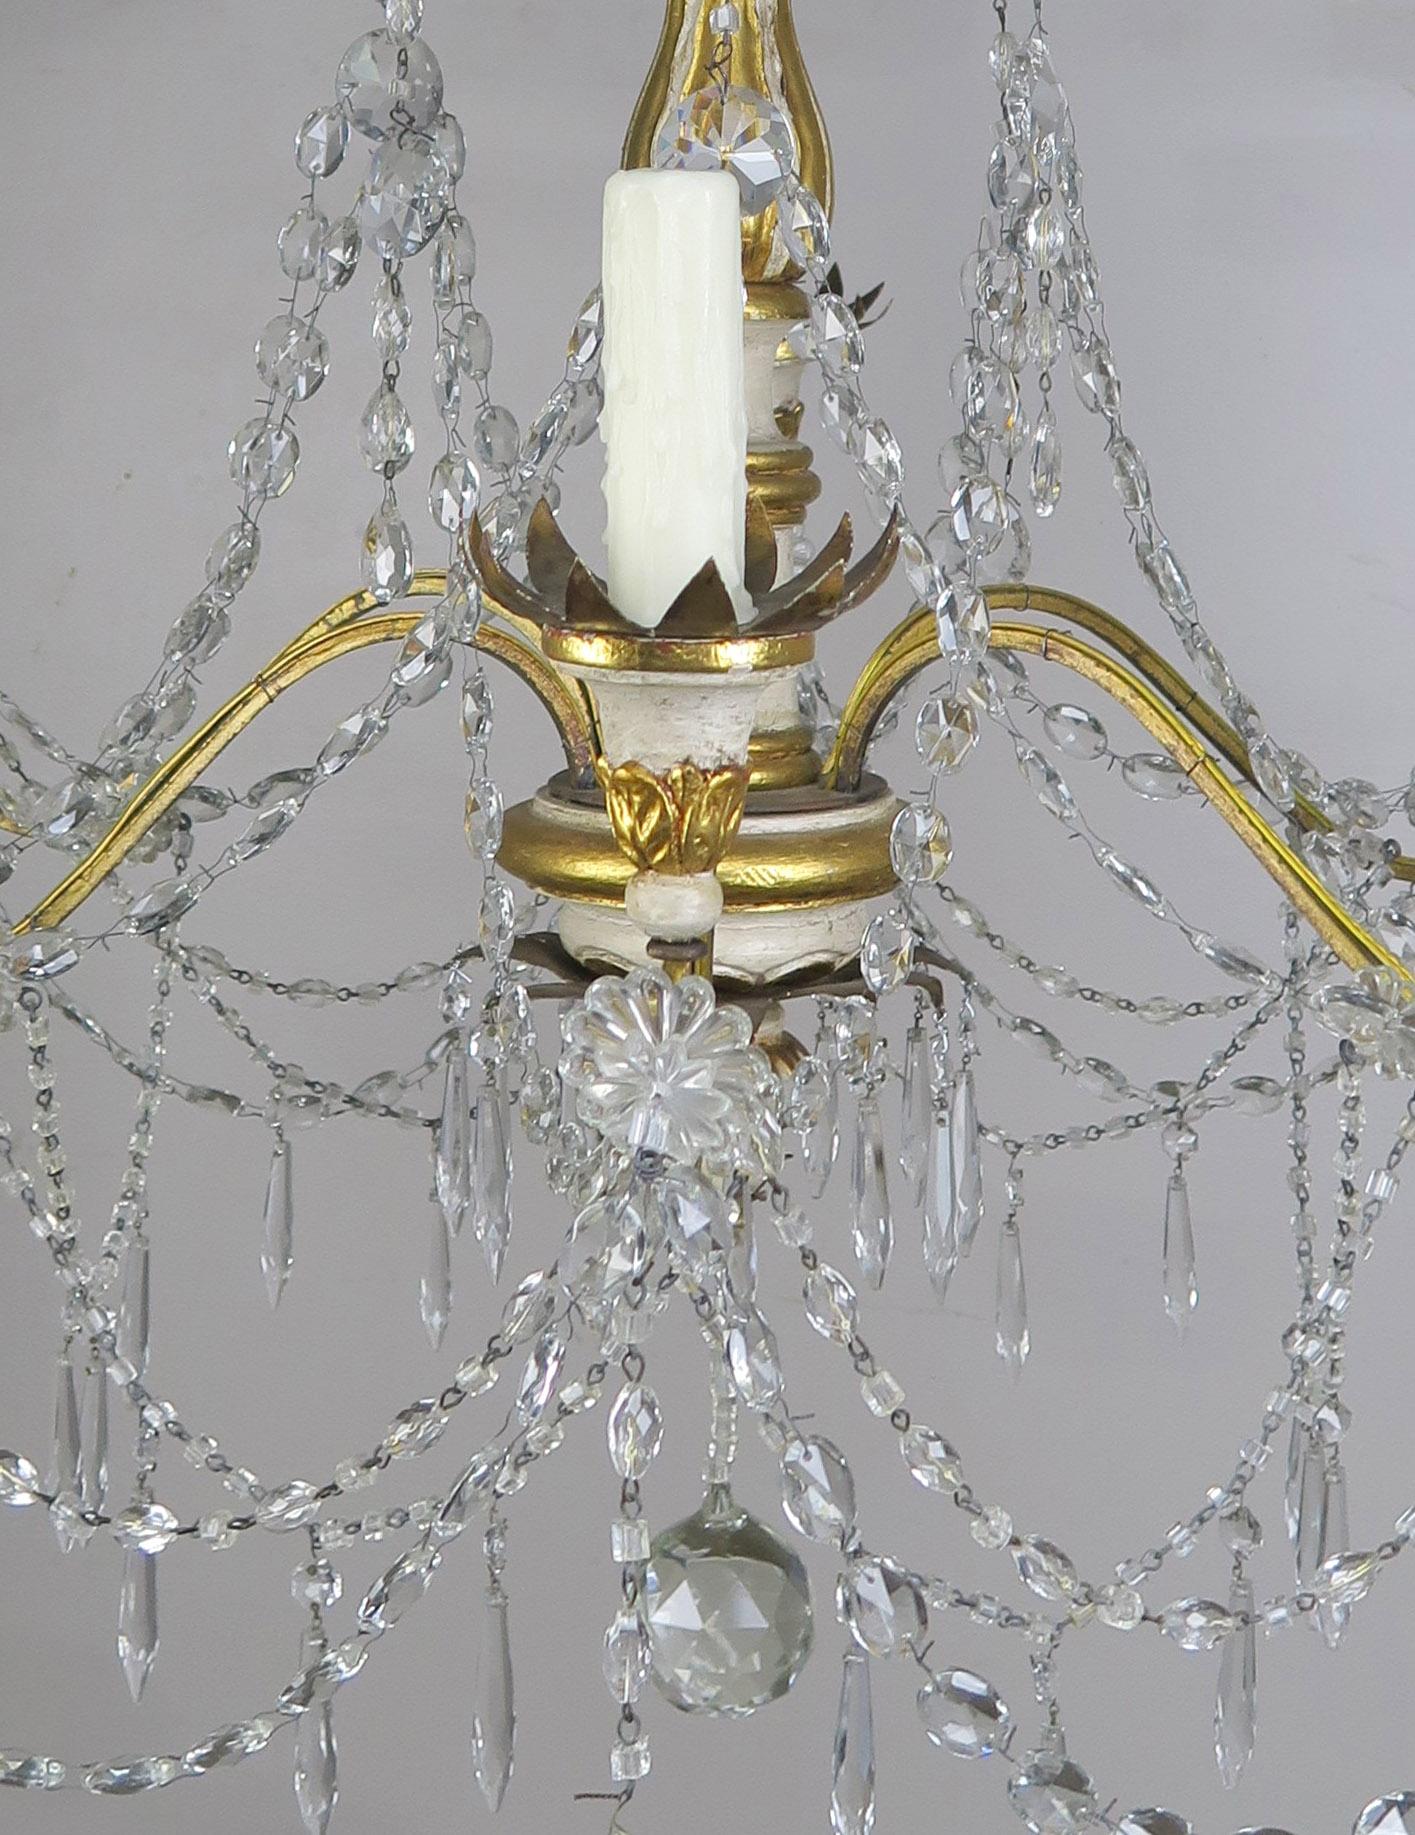 Hand-Painted Italian Geneviere Style Giltwood and Crystal Chandelier, circa 1900s